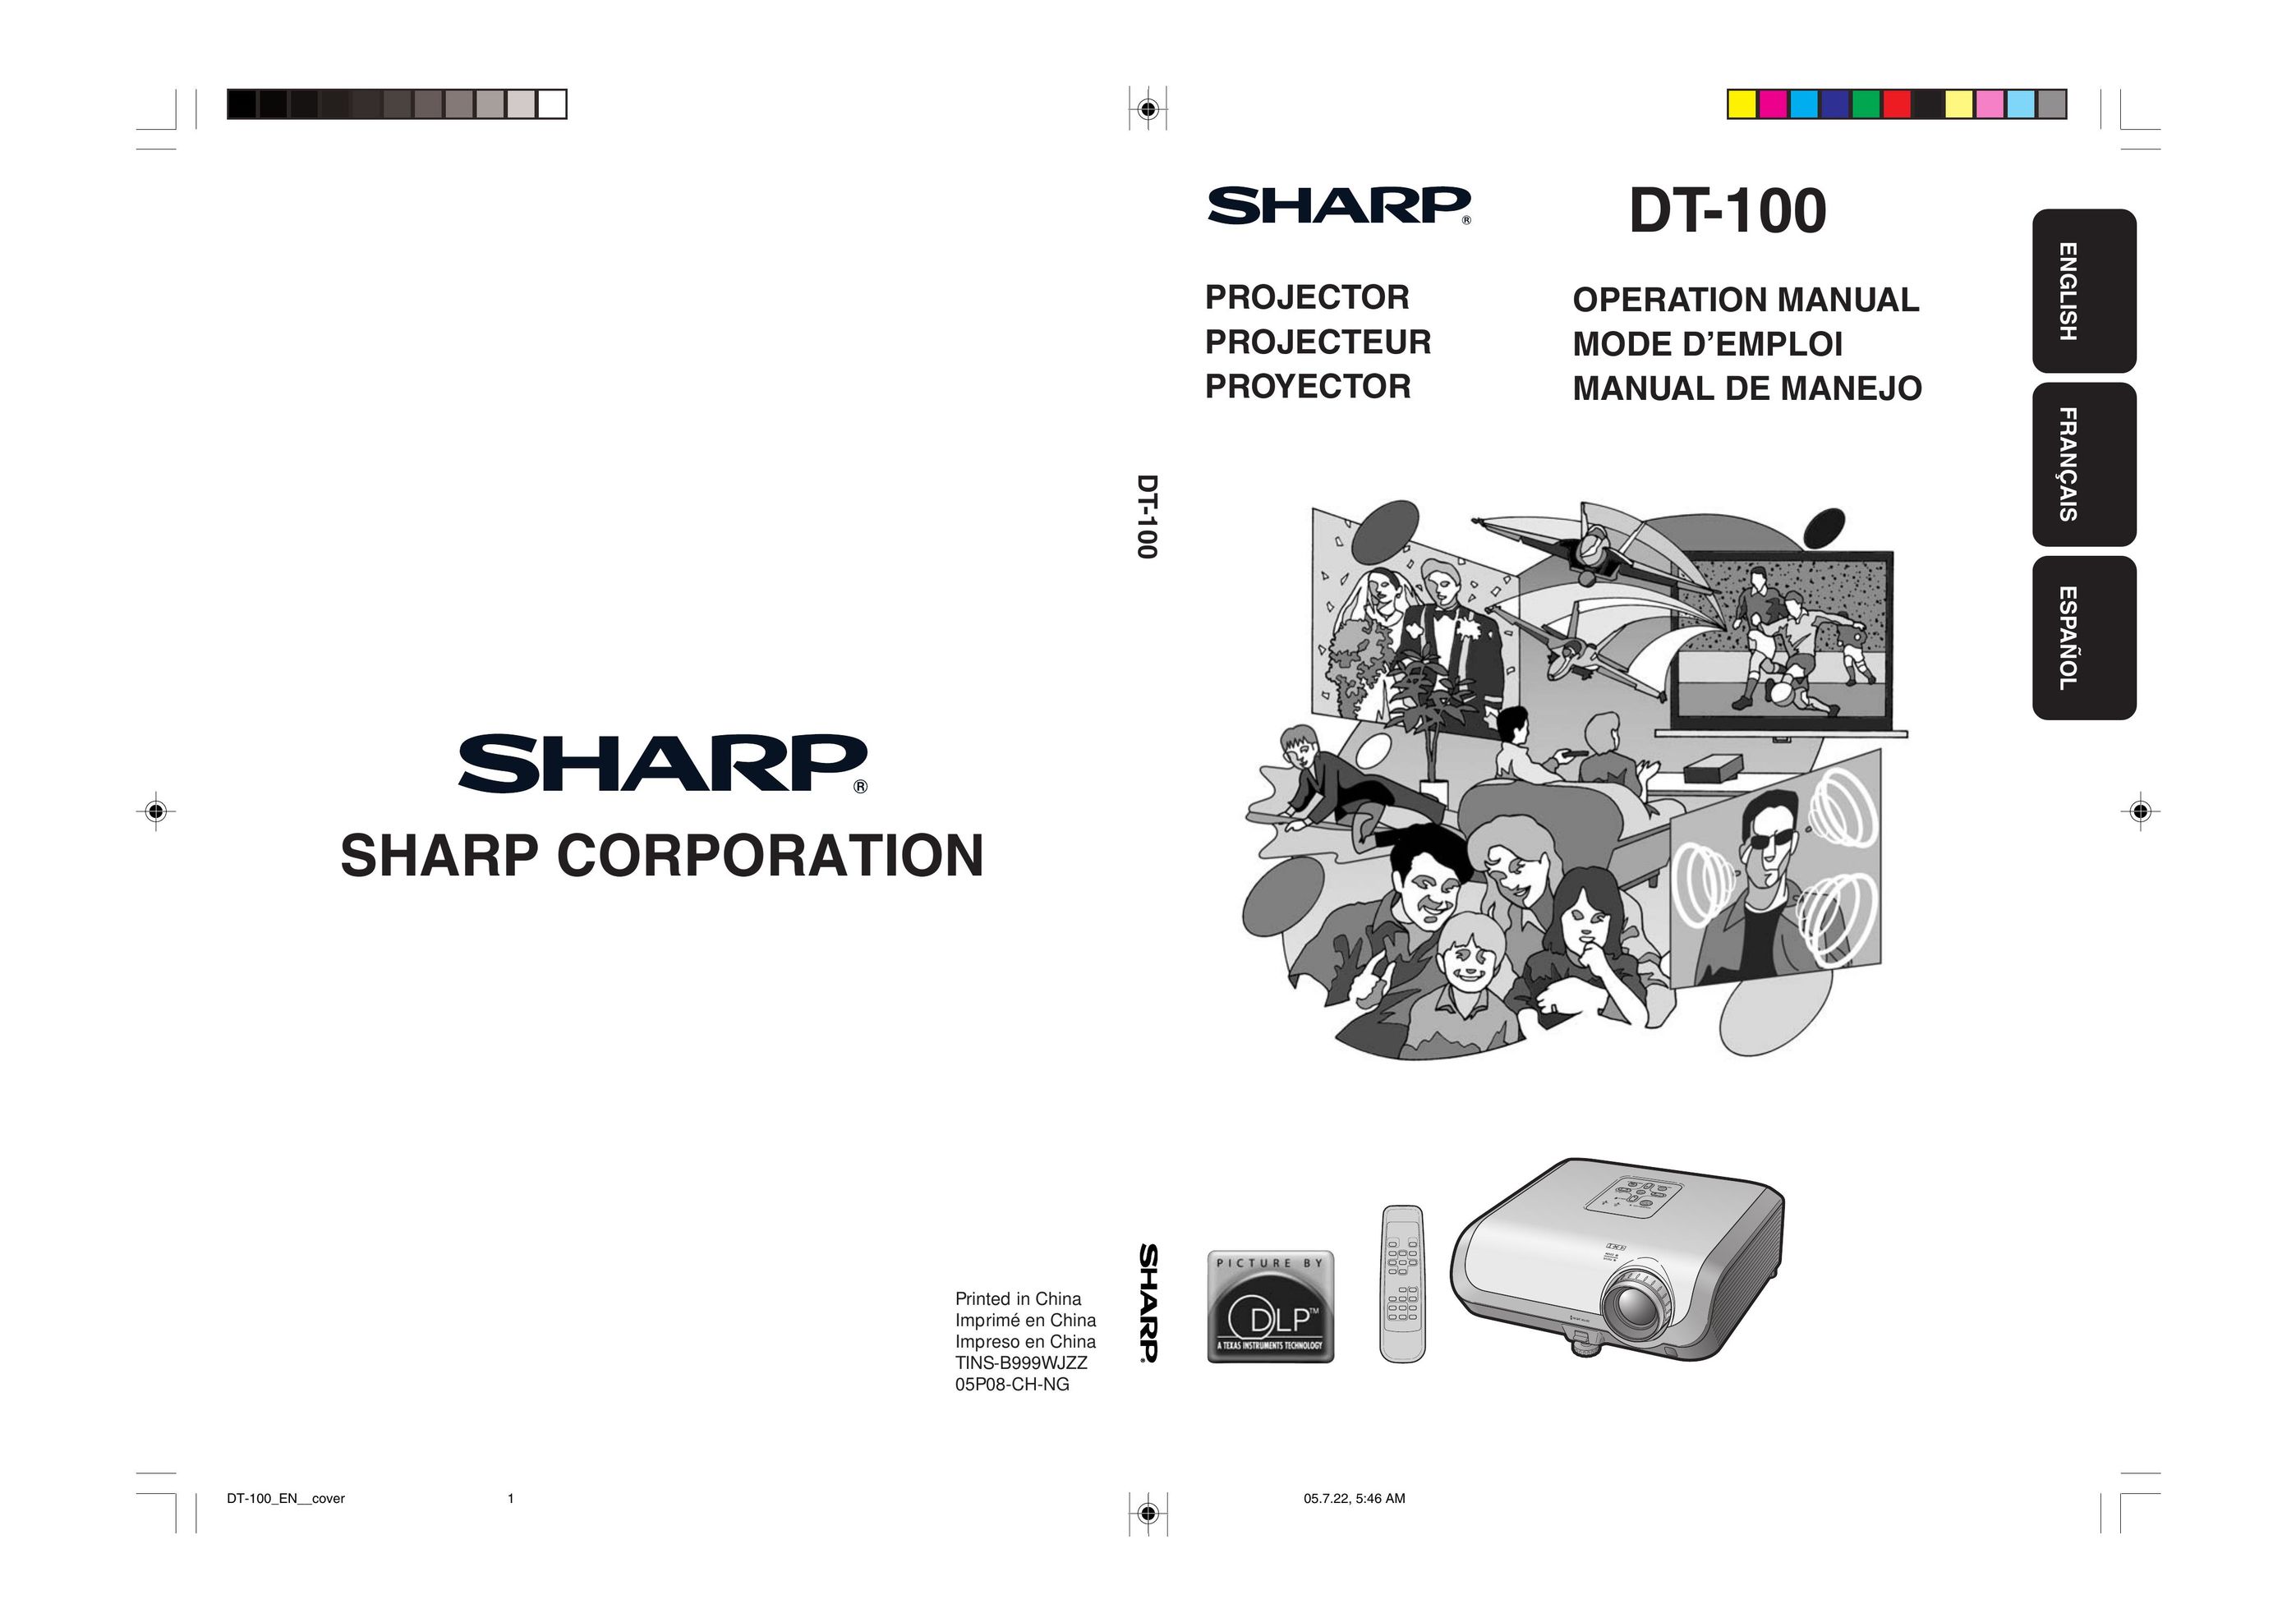 Sharp DT-100 Projector Accessories User Manual